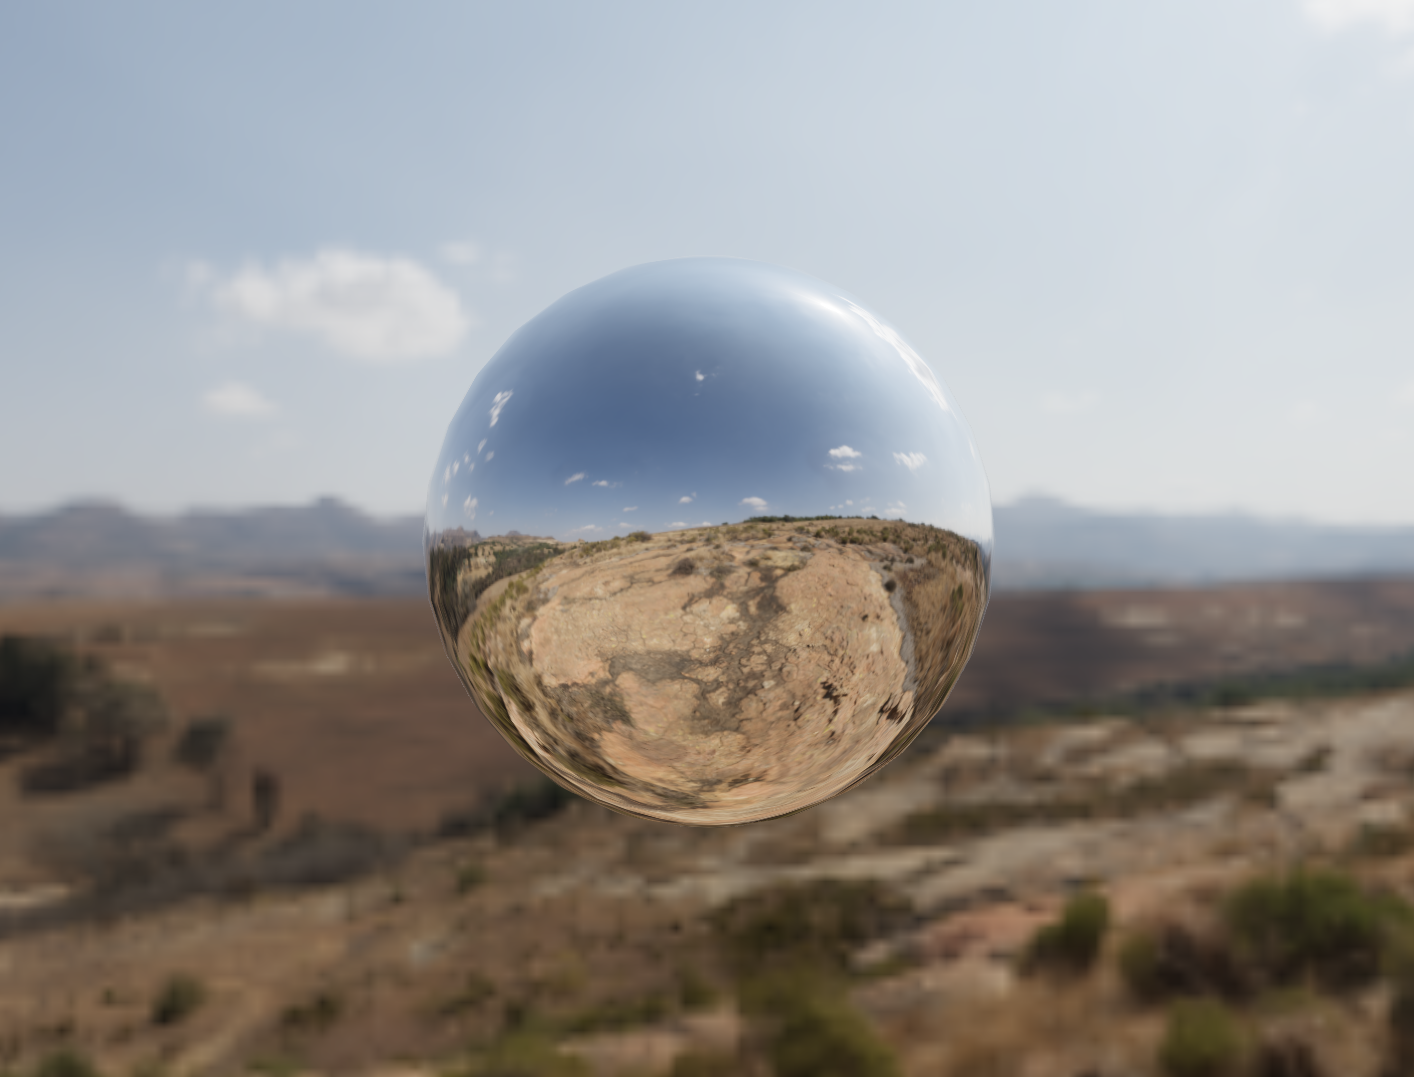 A low-resolution cubemap HDRI is loaded first for quick first render